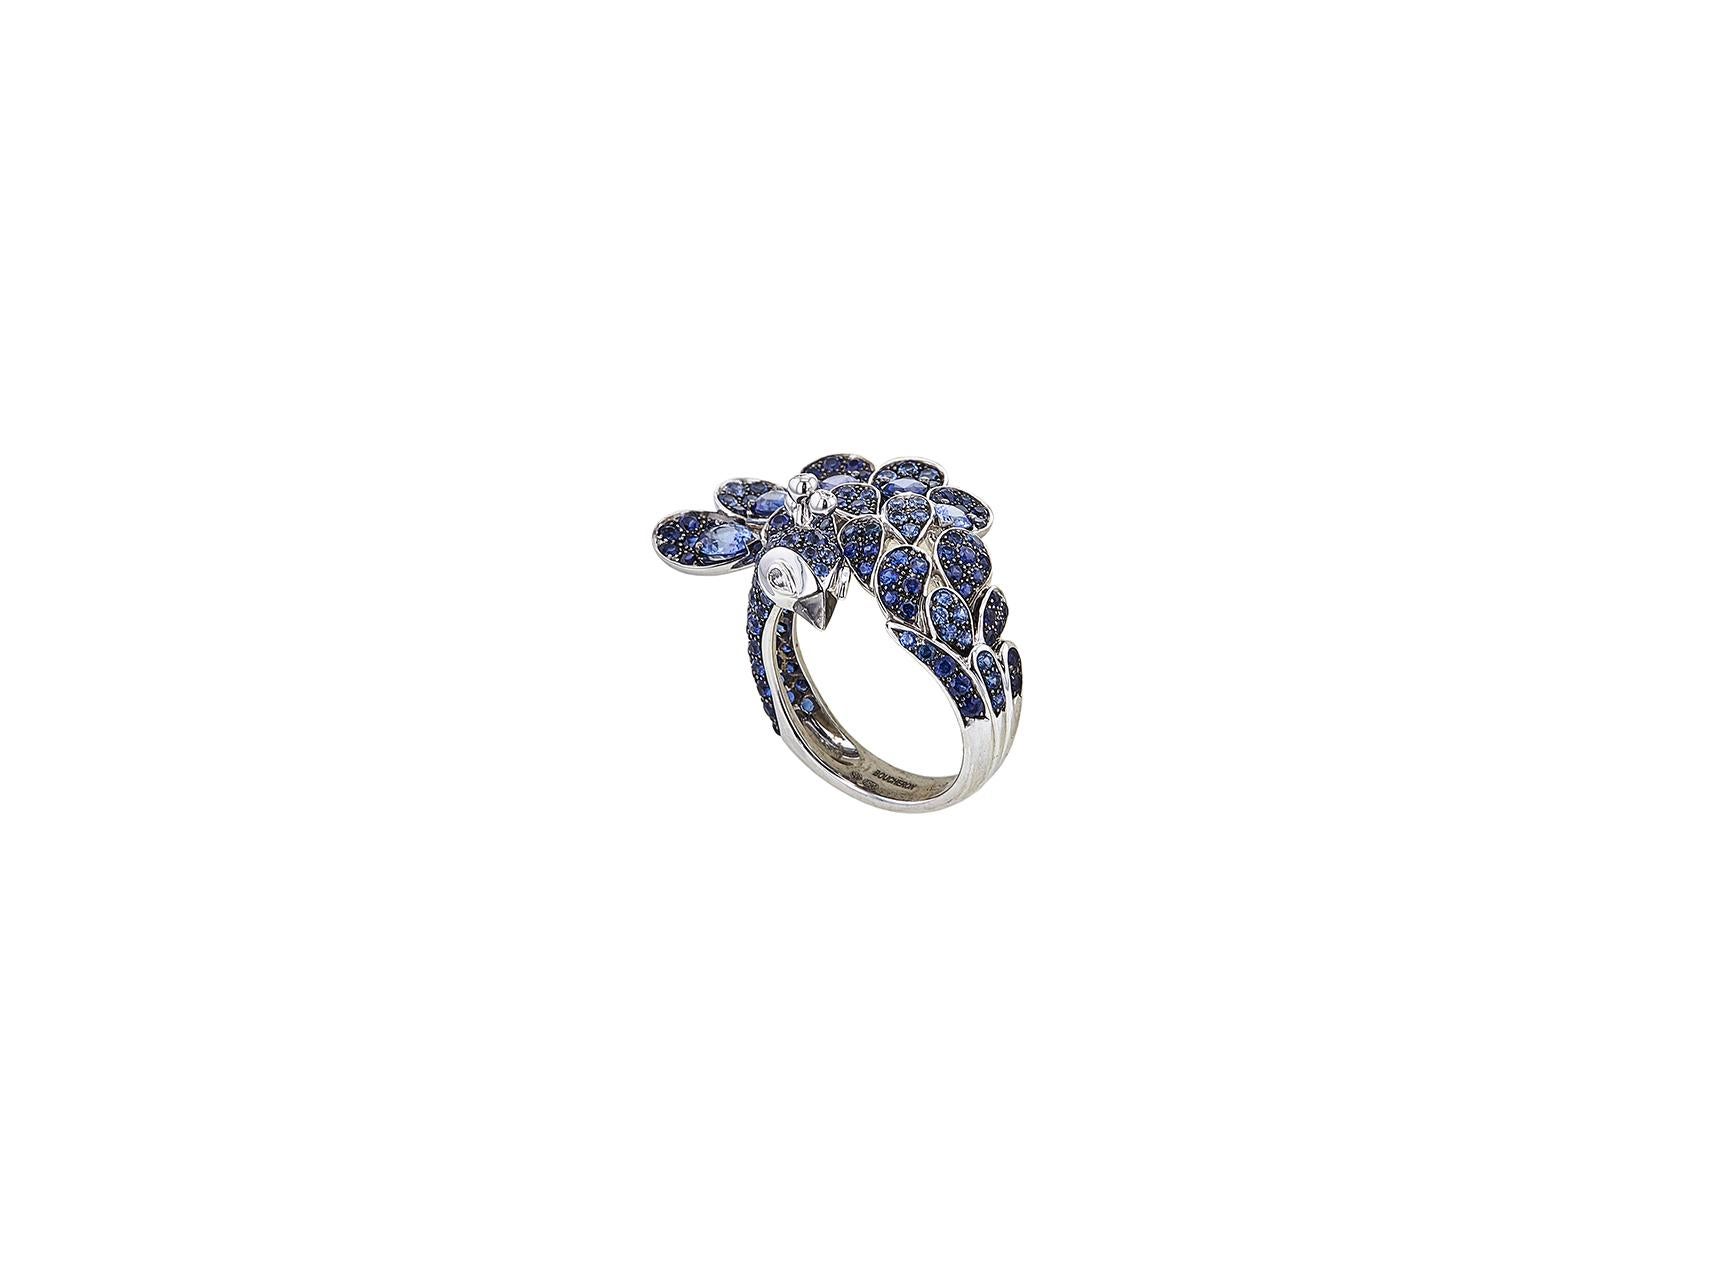 Authentic Boucheron Héra ring crafted in 18 karat white gold features a stunning peacock frame with pavé round and pear-shaped blue sapphires. The eyes of the peacock are comprised of pear-shaped diamonds with an estimated .15 total carat weight.